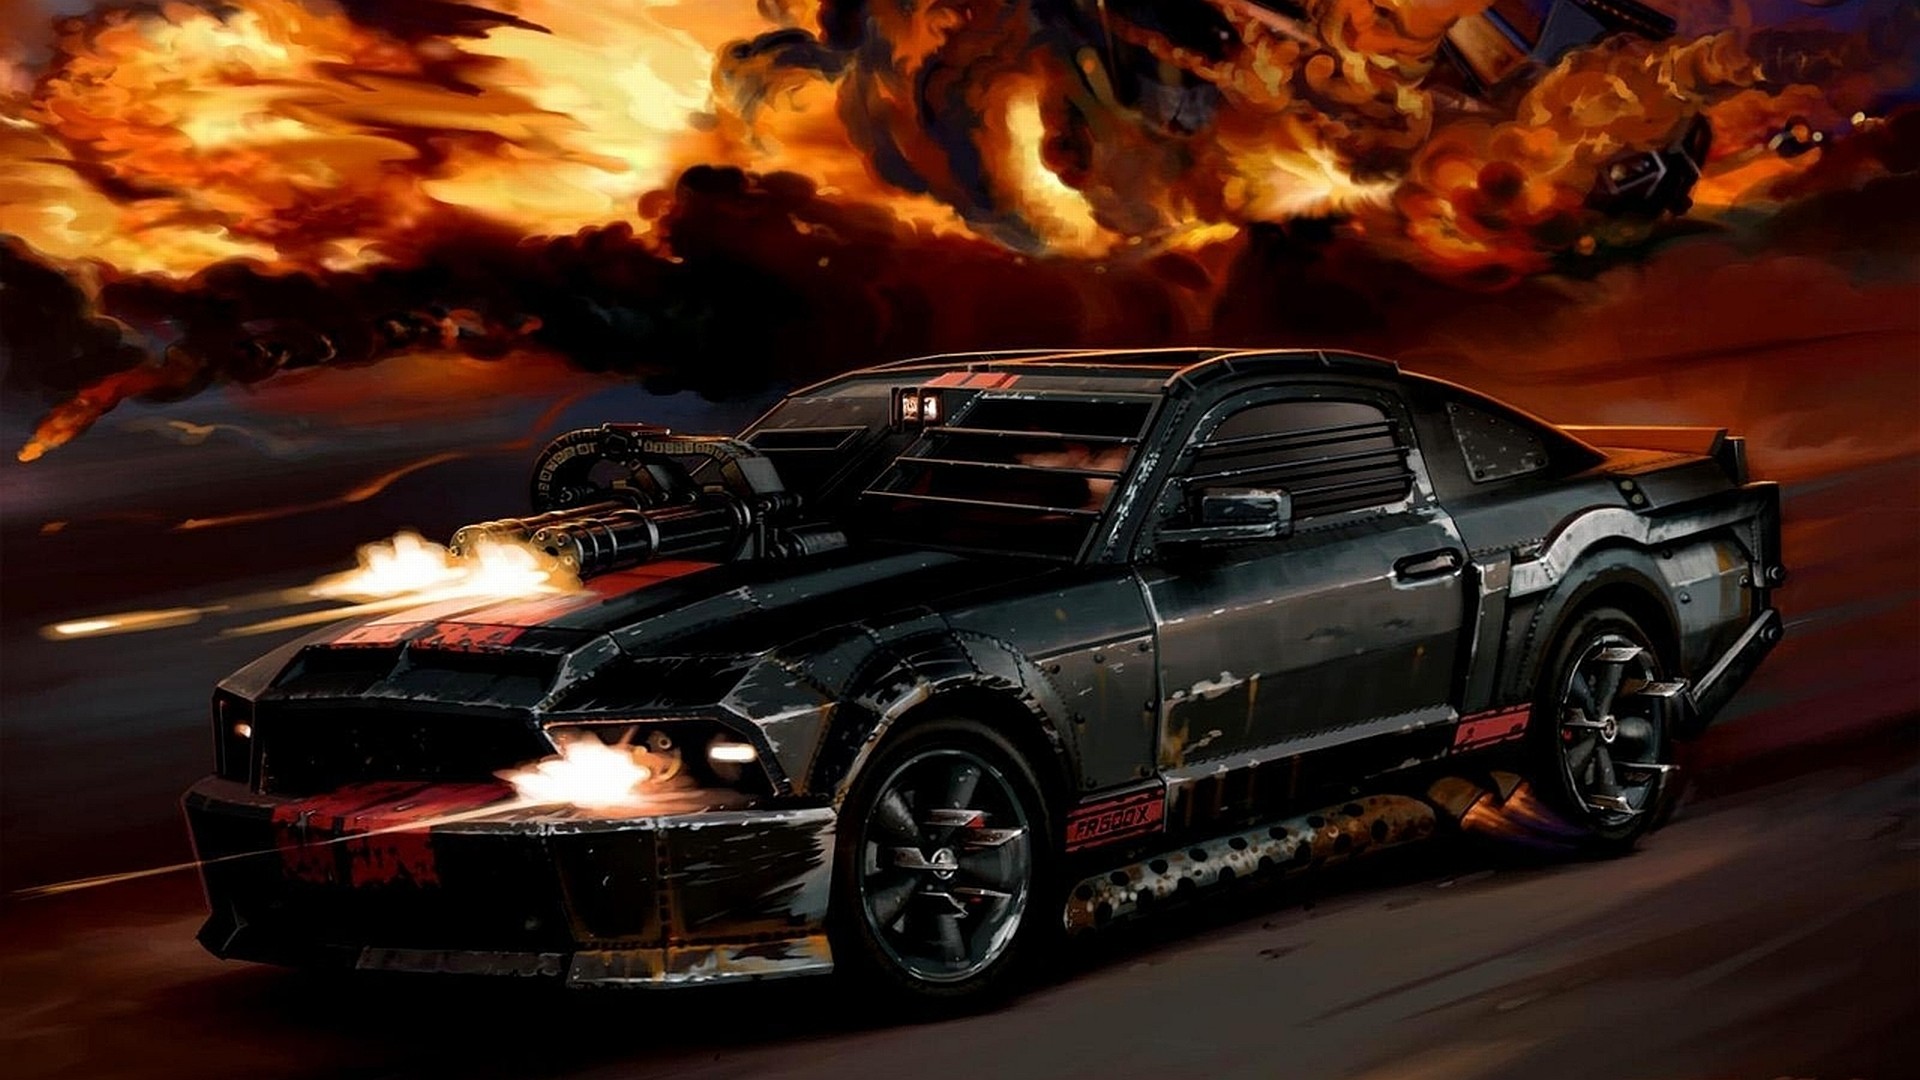 1920x1080 2 Death Race HD Wallpapers | Backgrounds